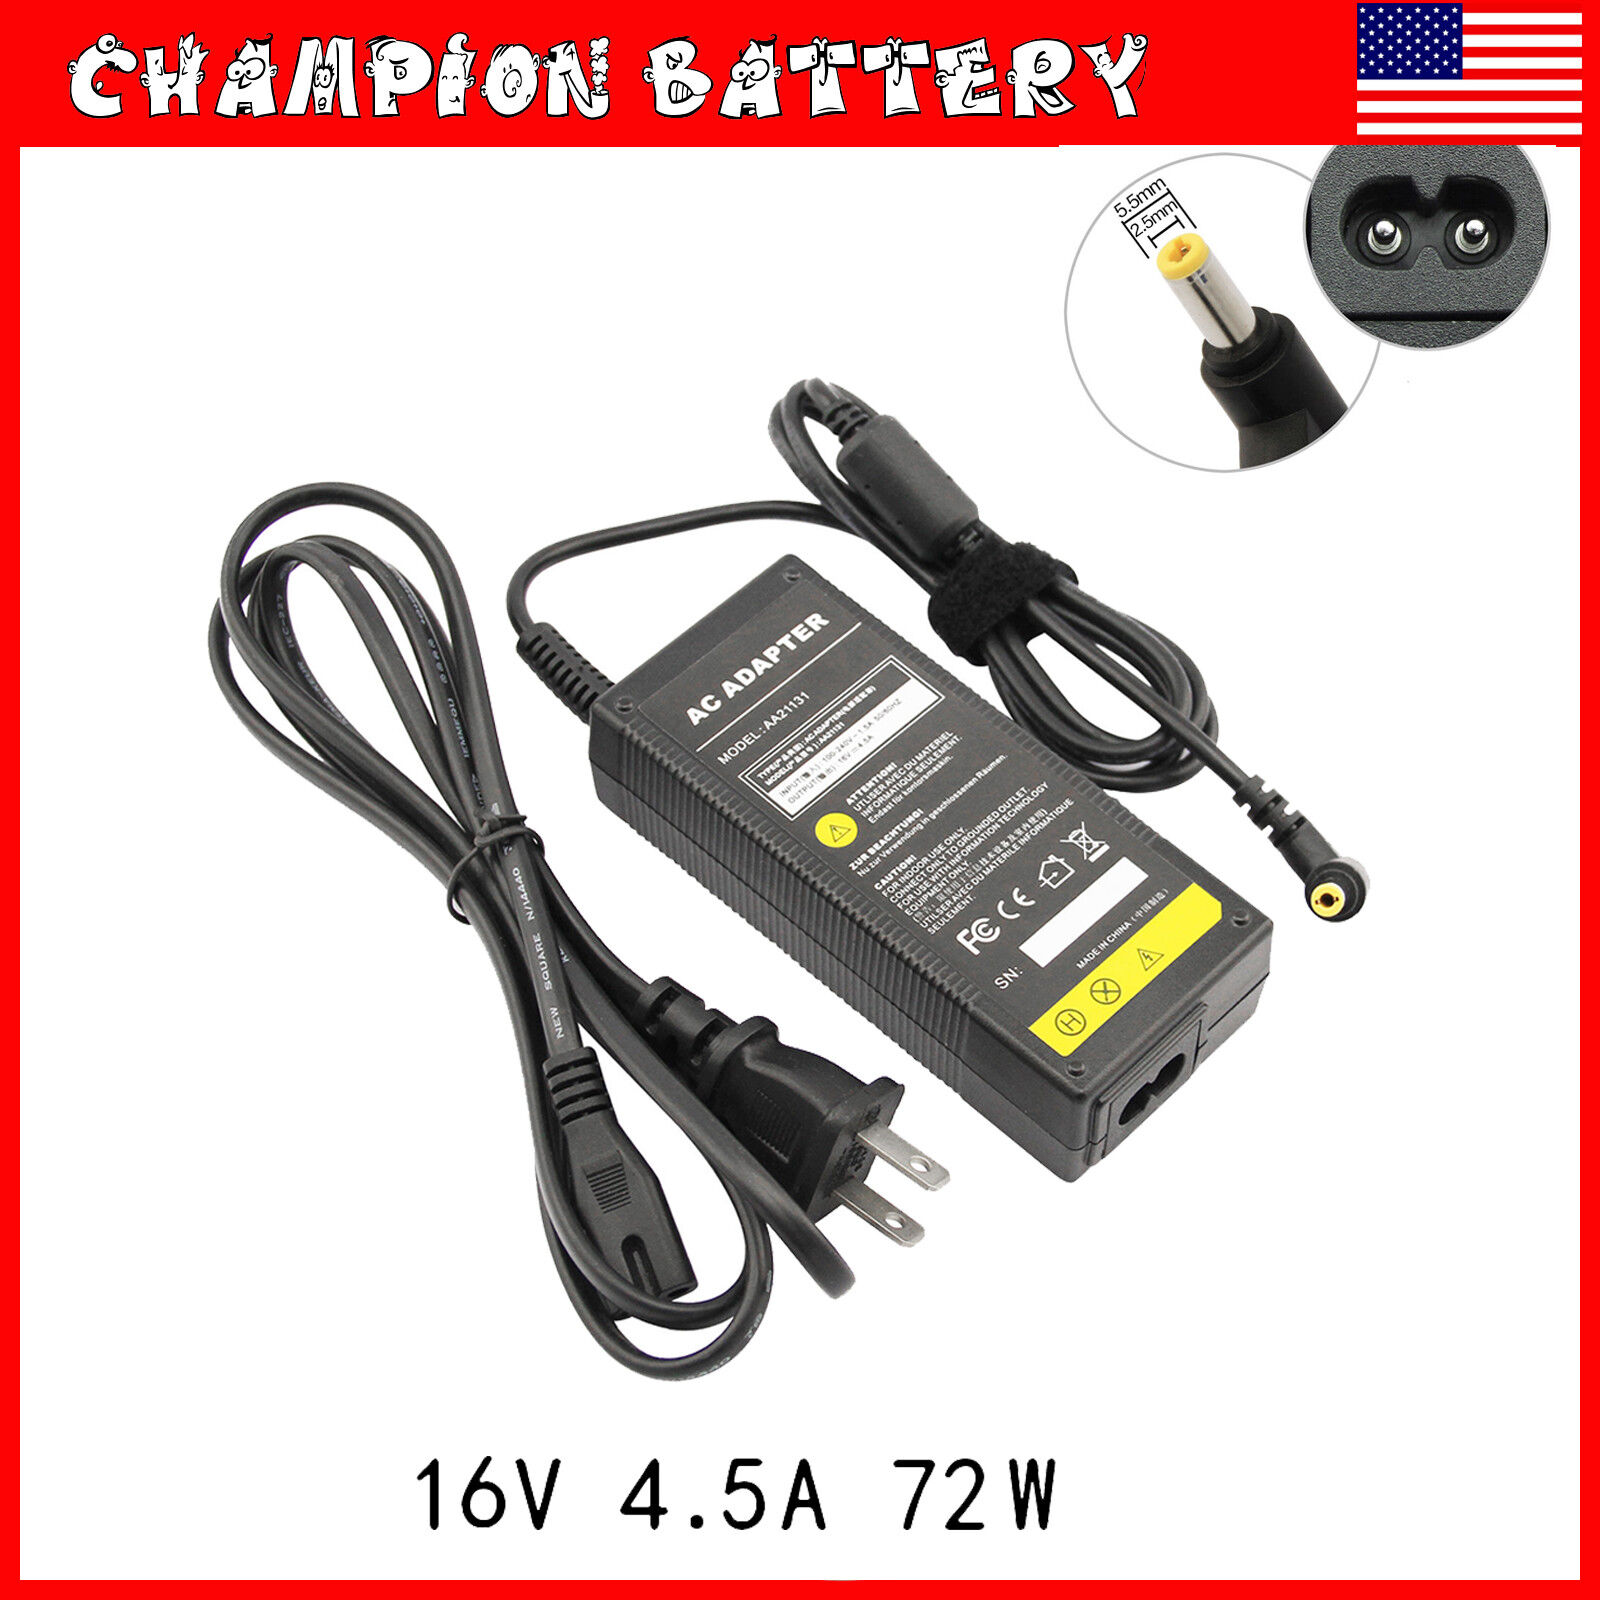 16V 4.5A AC Adapter Charger for Altec Lansing inMotion iM7 Speakers Power Supply